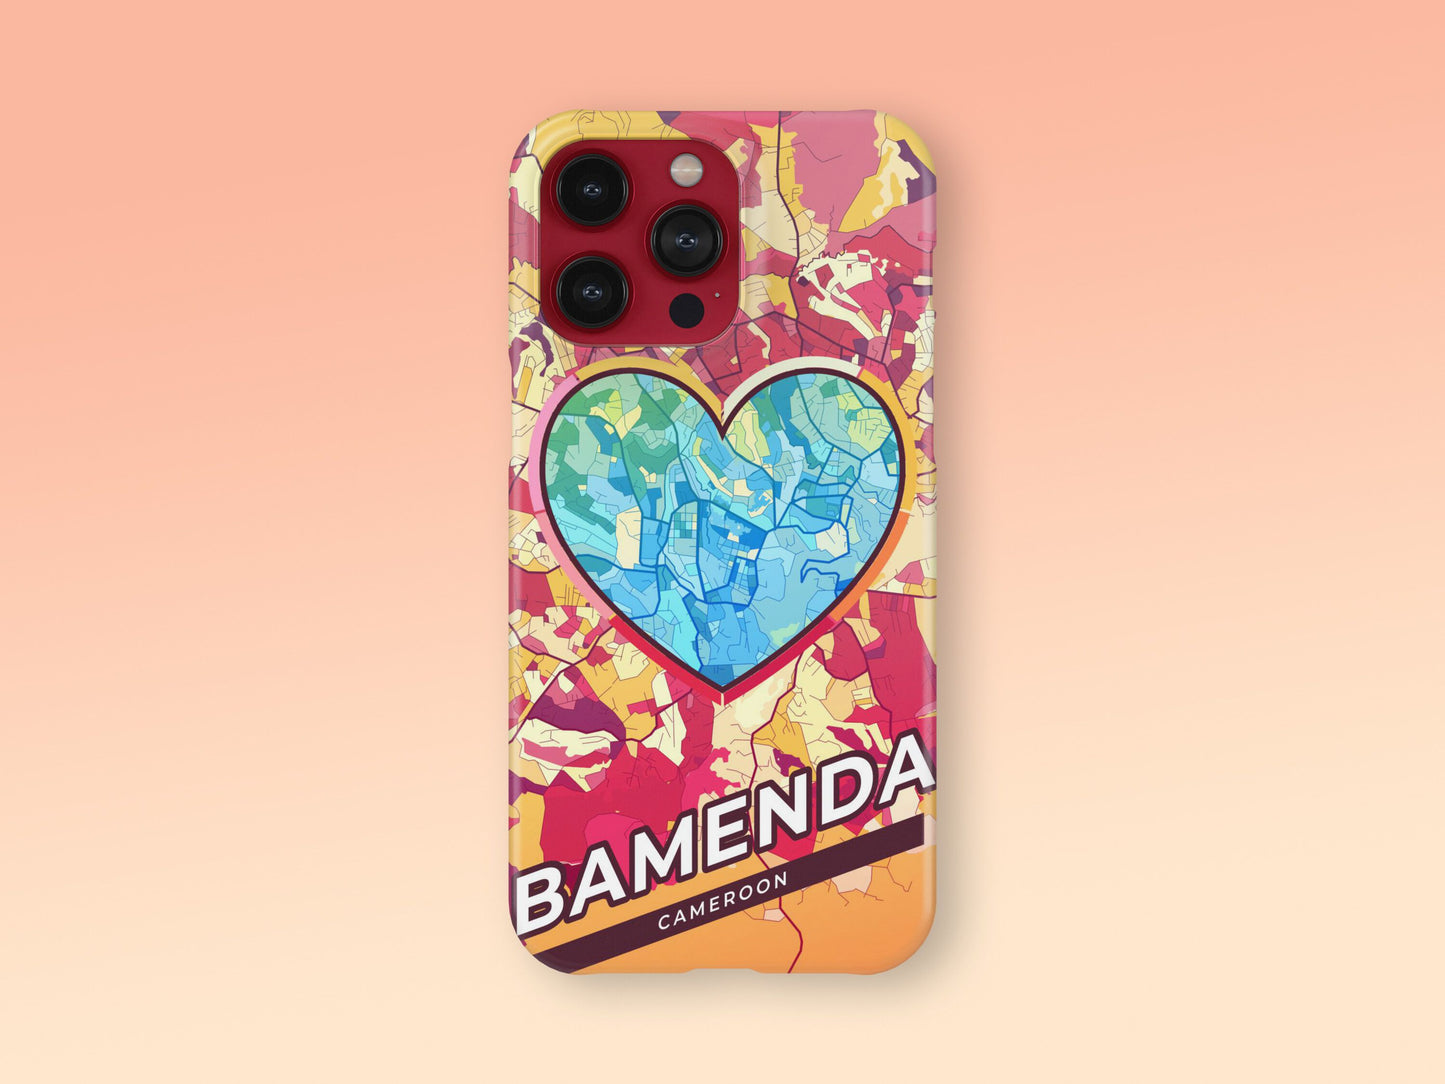 Bamenda Cameroon slim phone case with colorful icon. Birthday, wedding or housewarming gift. Couple match cases. 2